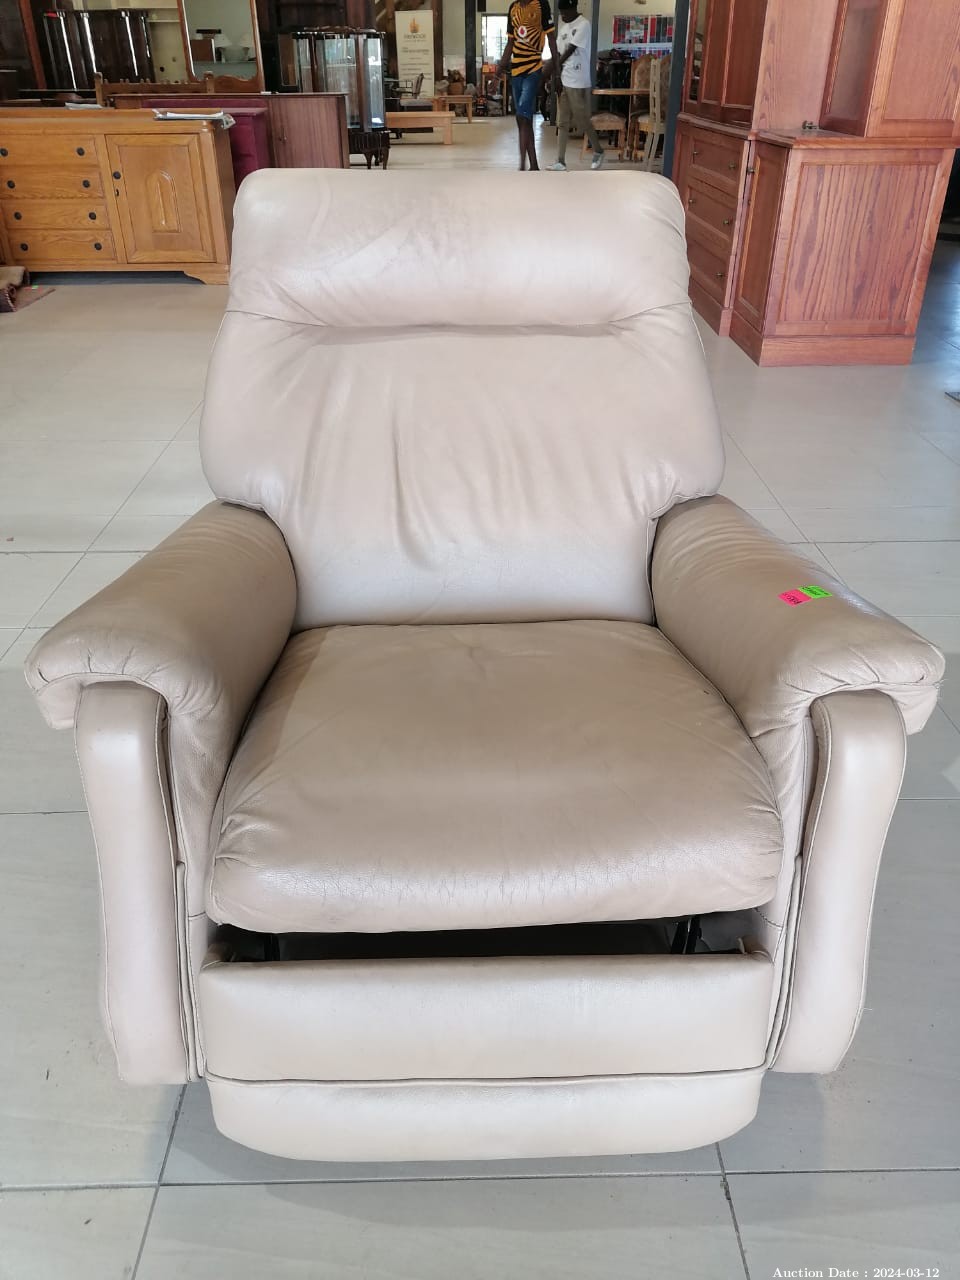 Lot 5828 - Leather Lazyboy Recliner